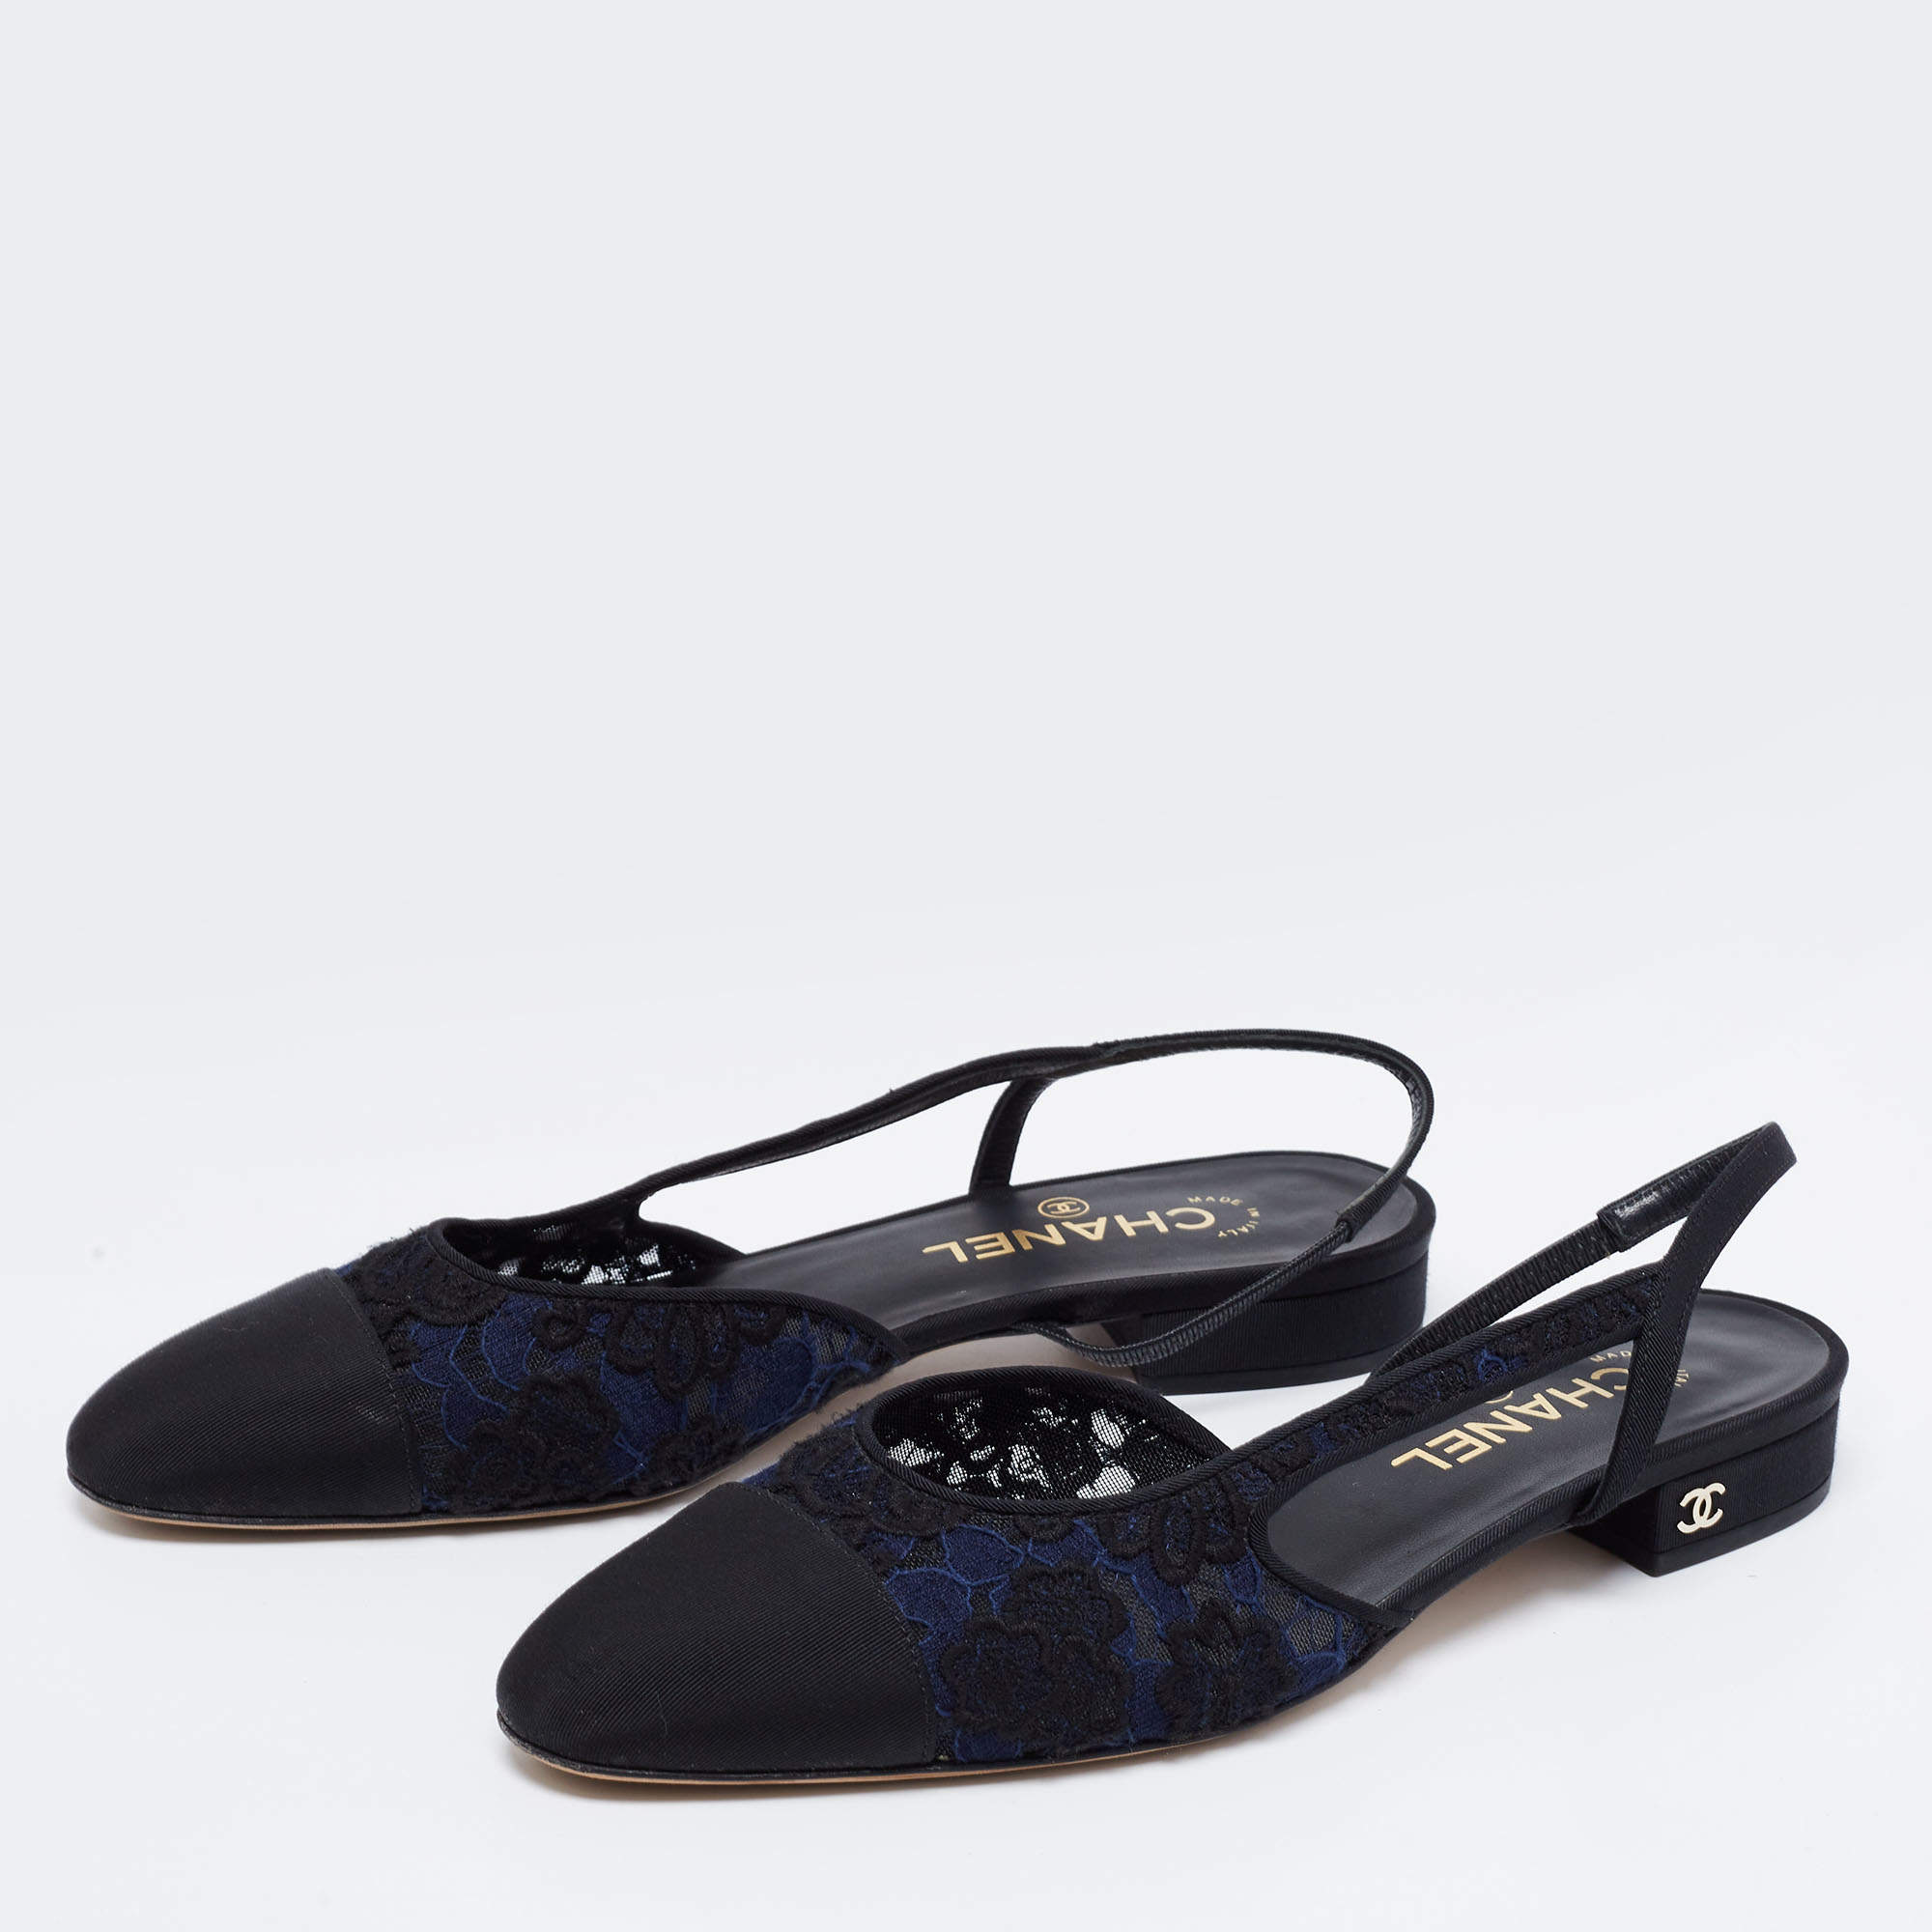 Chanel Black/Blue Lace and Fabric Cap-Toe Slingback Flats Size 38.5